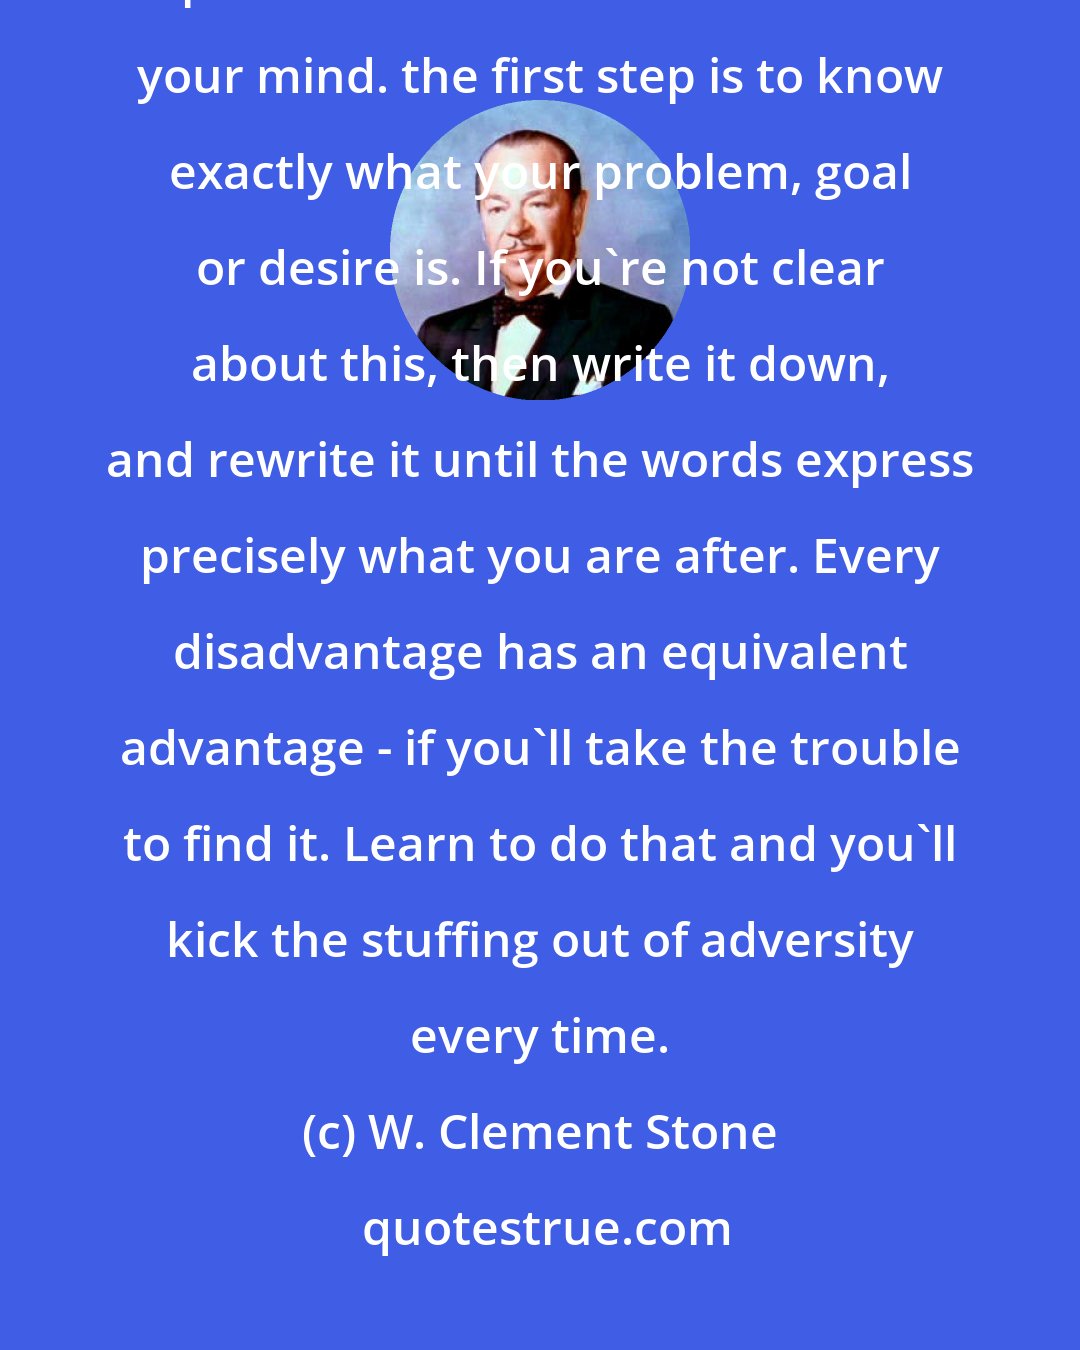 W. Clement Stone: All personal achievement starts in the mind of the individual. Your personal achievement starts in your mind. the first step is to know exactly what your problem, goal or desire is. If you're not clear about this, then write it down, and rewrite it until the words express precisely what you are after. Every disadvantage has an equivalent advantage - if you'll take the trouble to find it. Learn to do that and you'll kick the stuffing out of adversity every time.